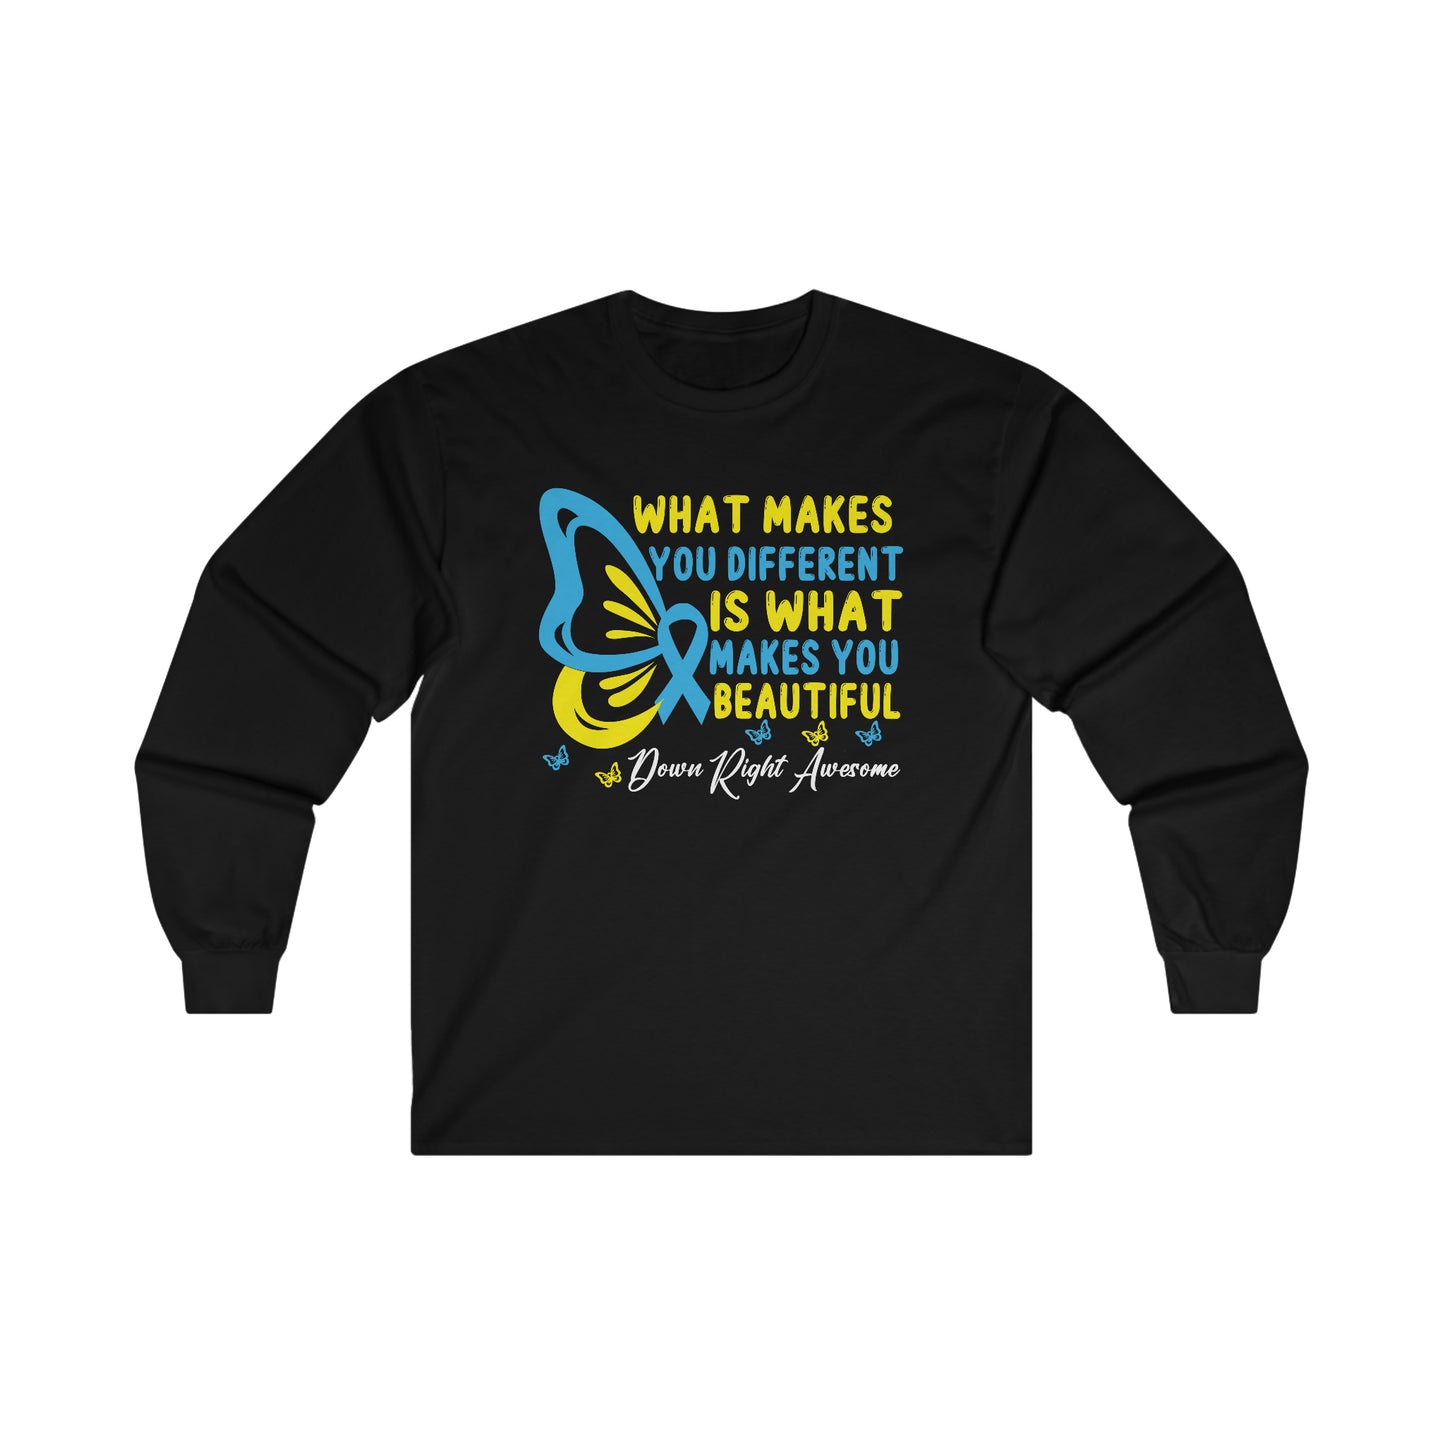 Down Right Awesome Long Sleeve Shirt